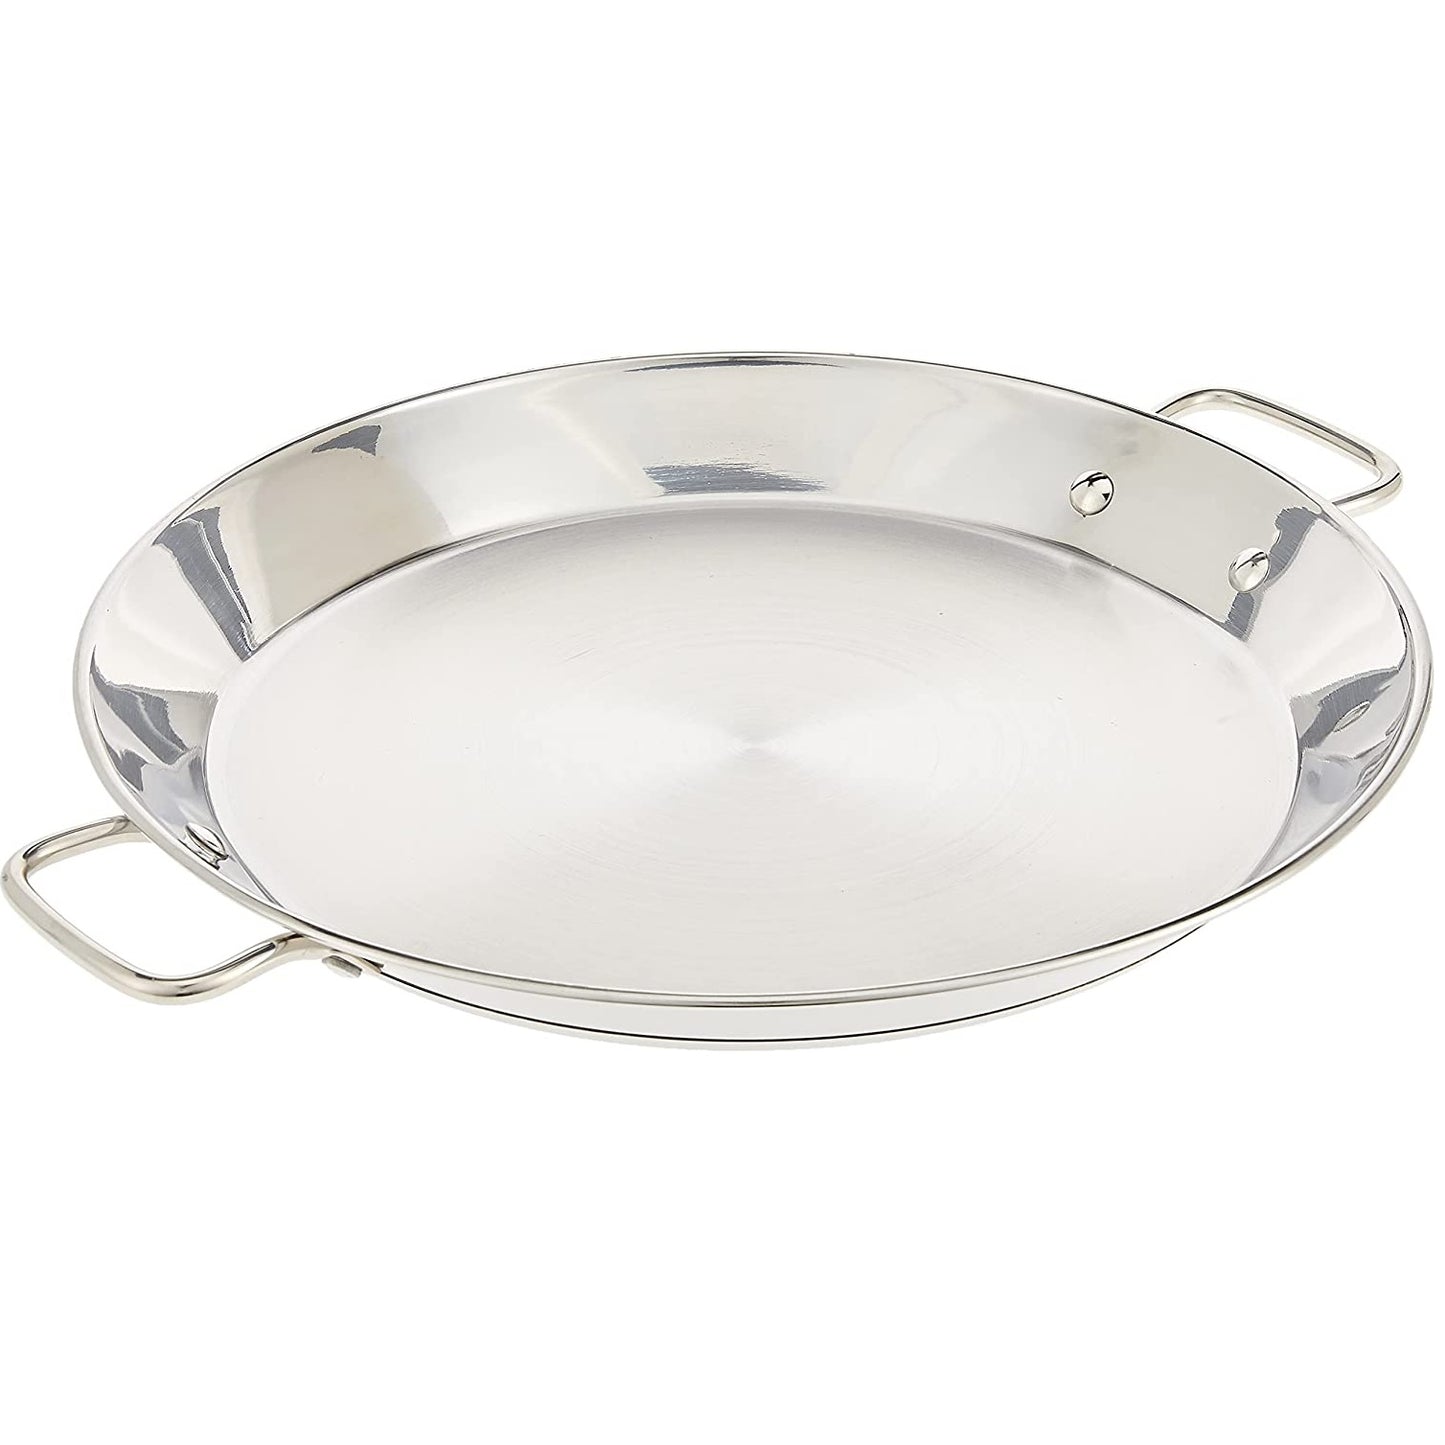 Stainless steel paella pan (can be used with induction) - diameter sizes 36cm, 40cm